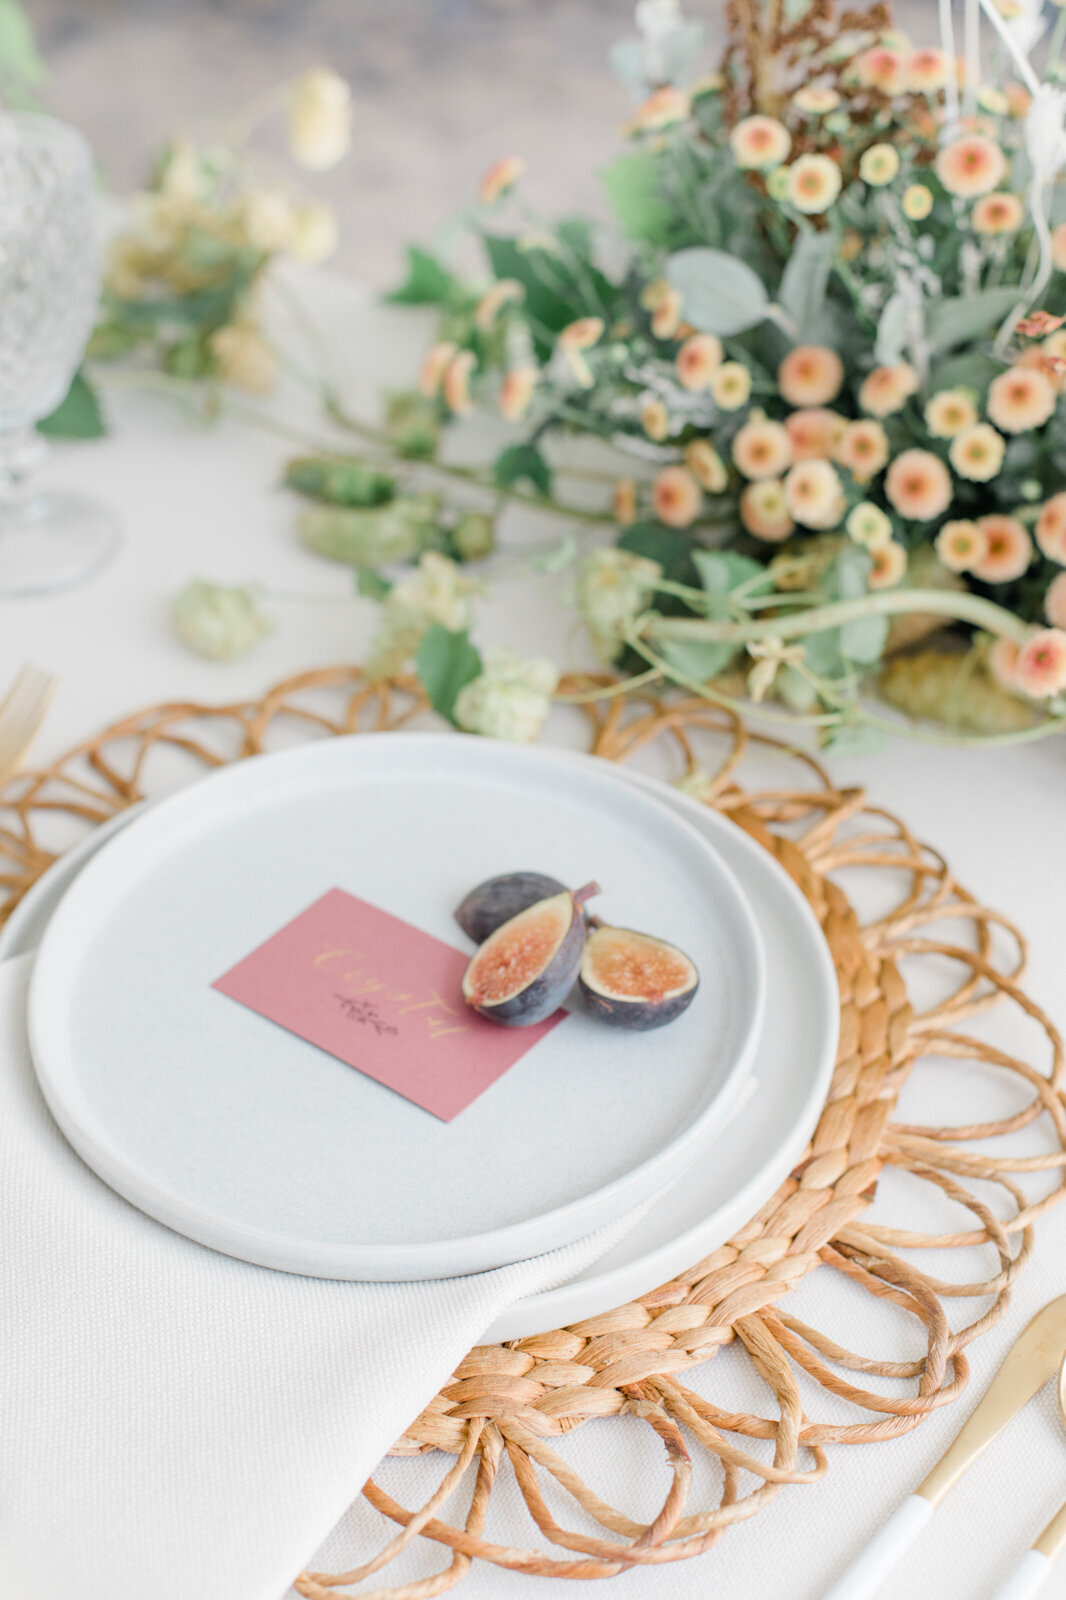 Stunning wedding reception place setting, daisy rattan charger, elegant white dinner plate, name tag, and purple pears, captured by Ana Douglas Photography, timeless and authentic wedding photographer in Vancouver, BC. Featured on the Bronte Bride Vendor Guide.